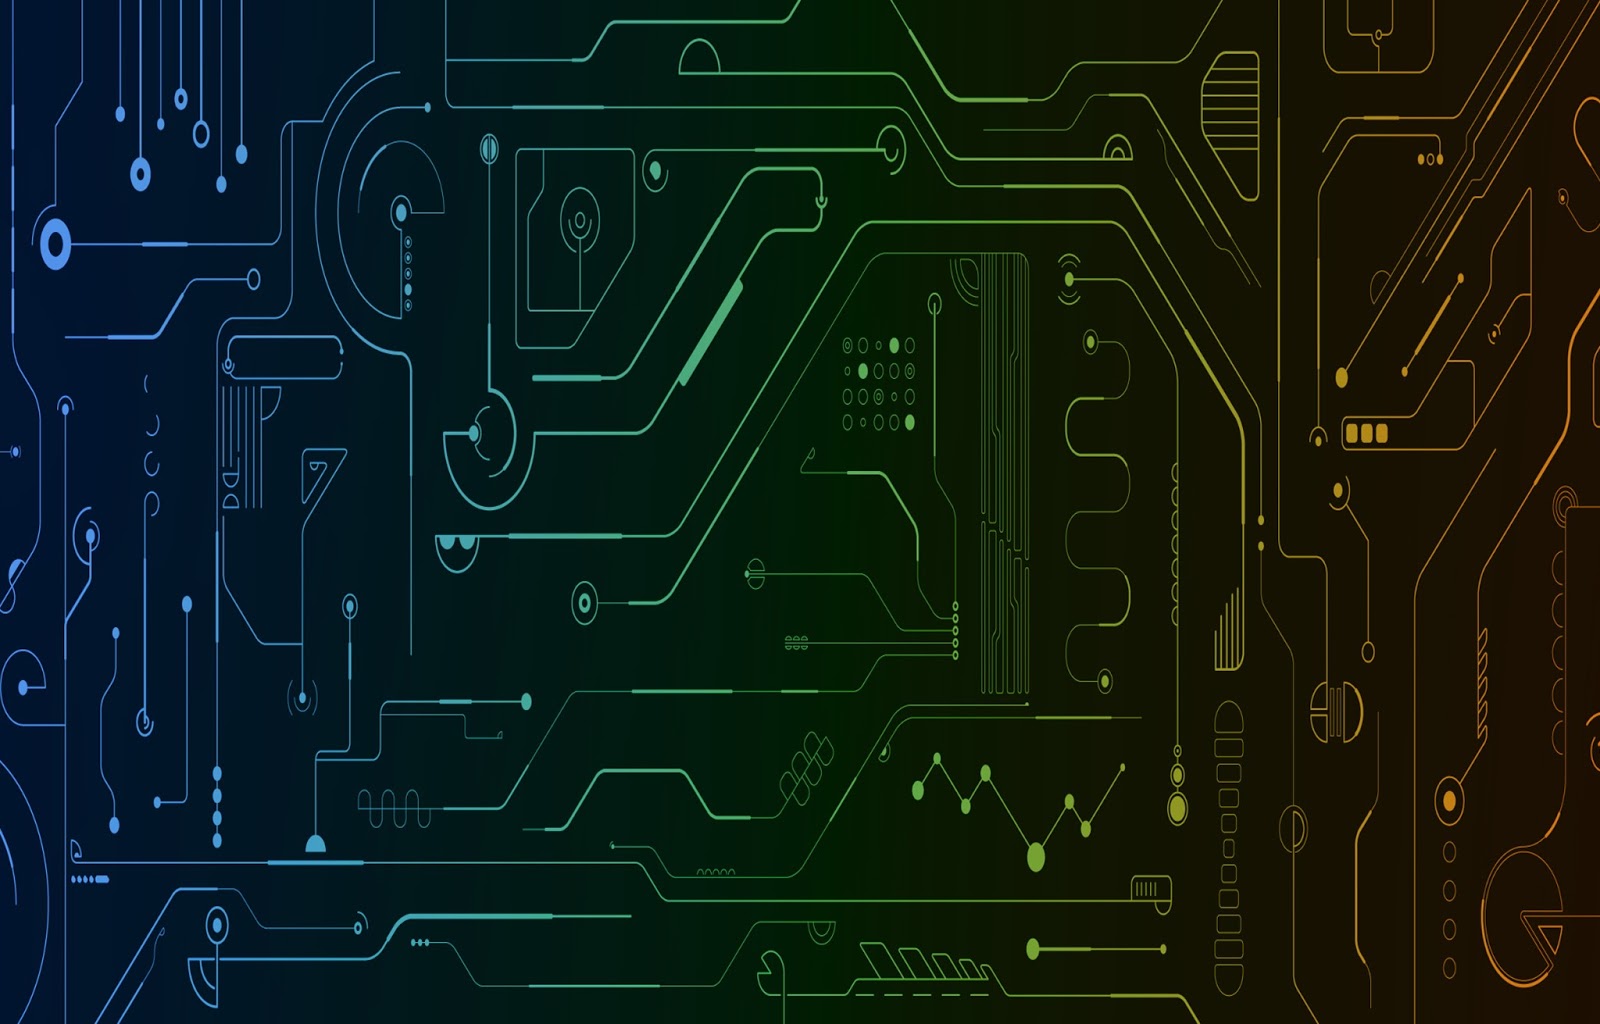 circuit wallpaper hd,green,electronics,line,text,electronic engineering